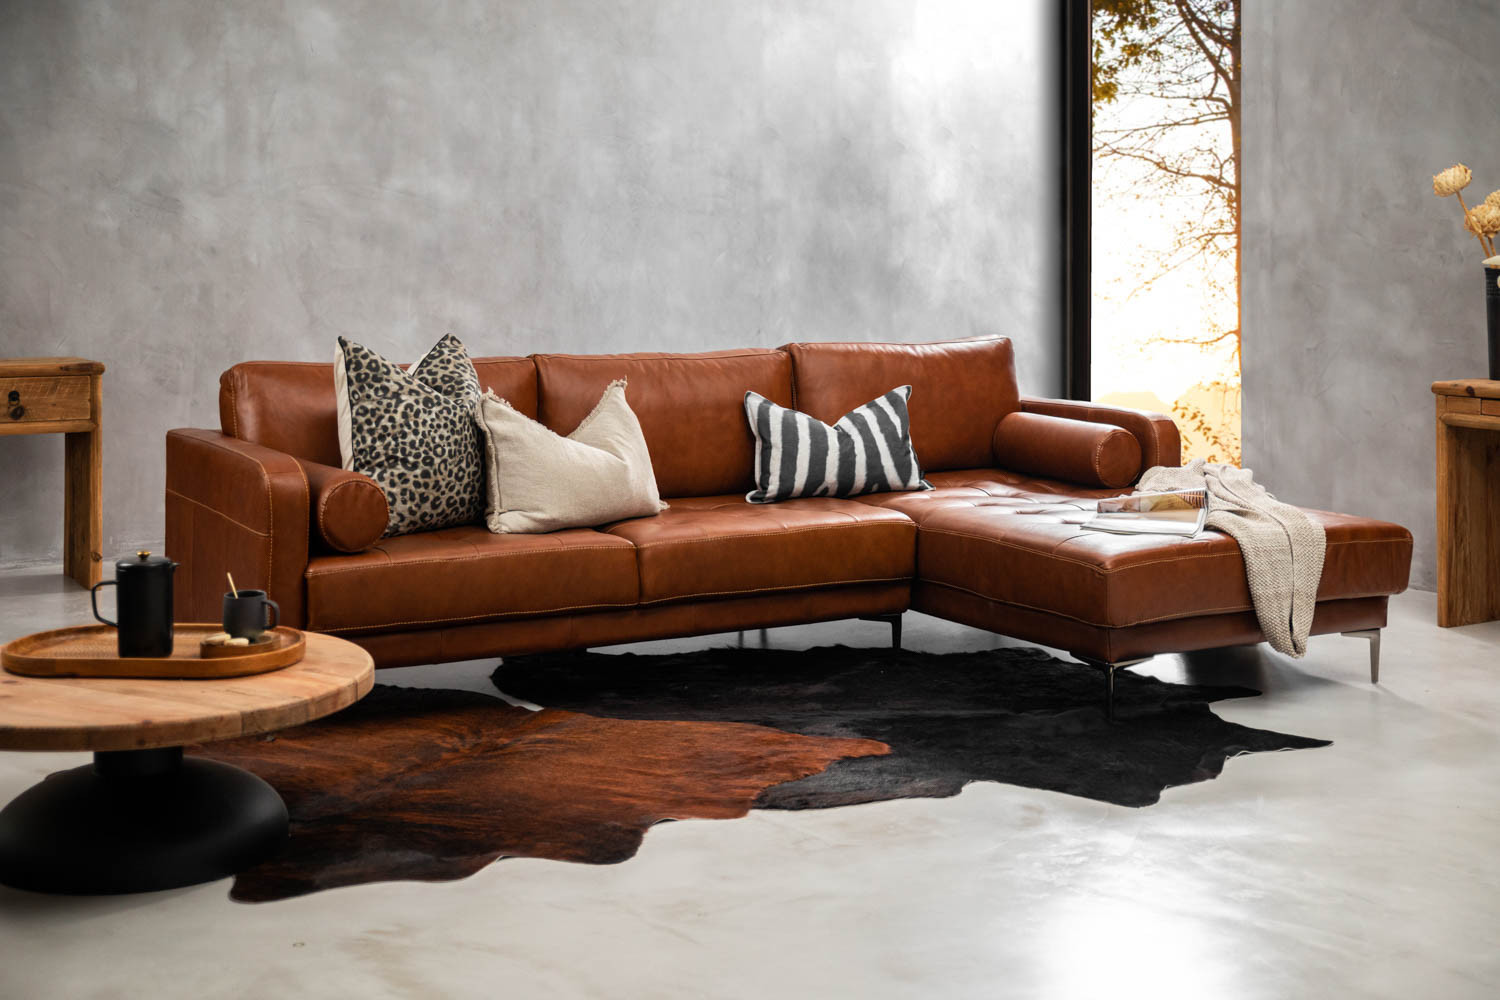 Hayden Leather L Shape Couch - Burnt Tan